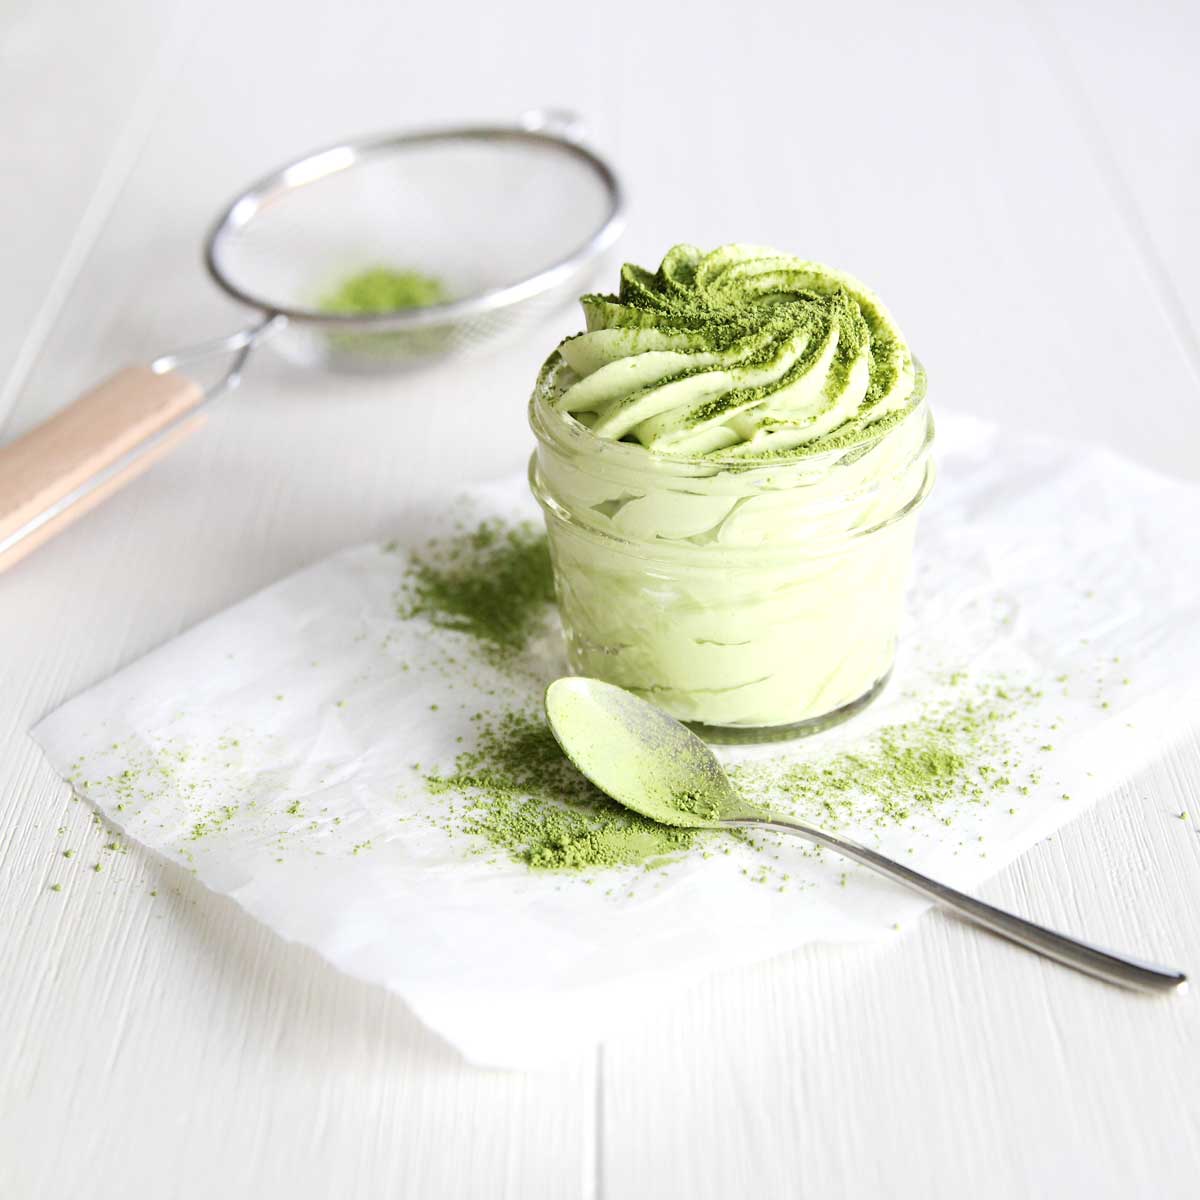 How to Make Sweet Matcha Whipped Cream (with a Sugar Free Option) - Sweet Matcha Whipped Cream